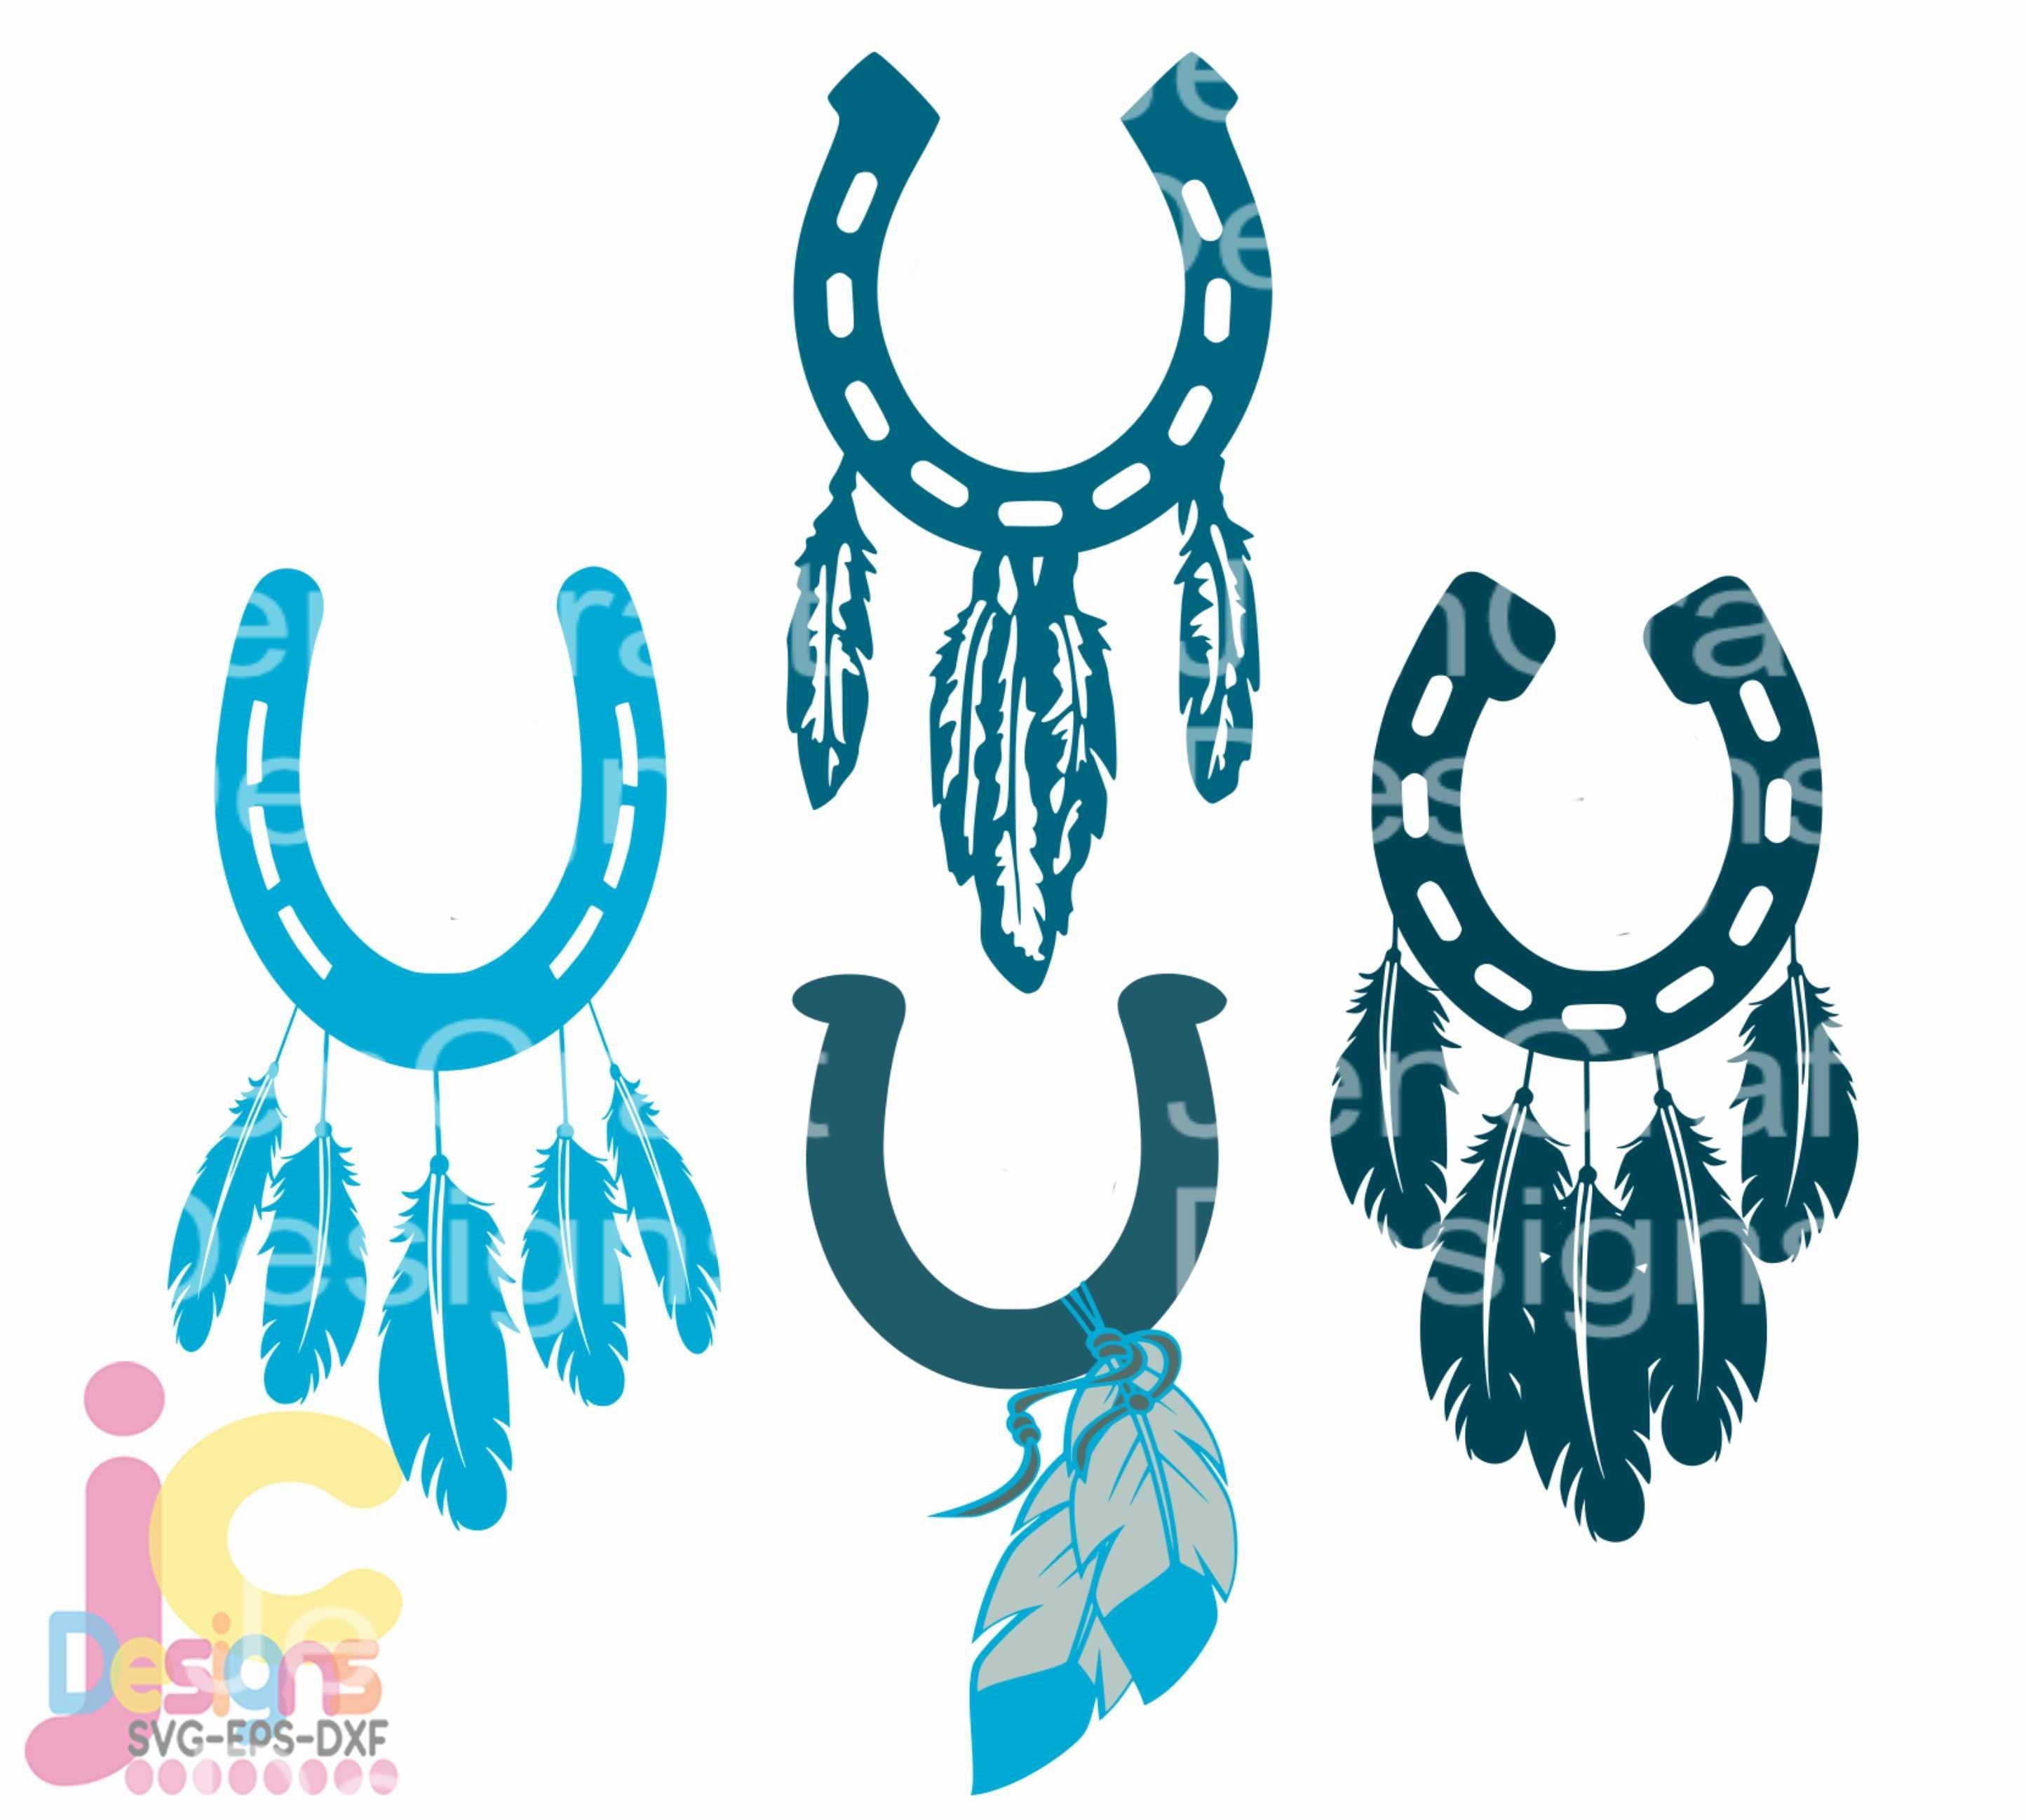 Download Horseshoe svg Feathers Monogram Frame SVG, Dxf, Eps , Png Cowboy, Cowgirl, Country Boho Instant ...